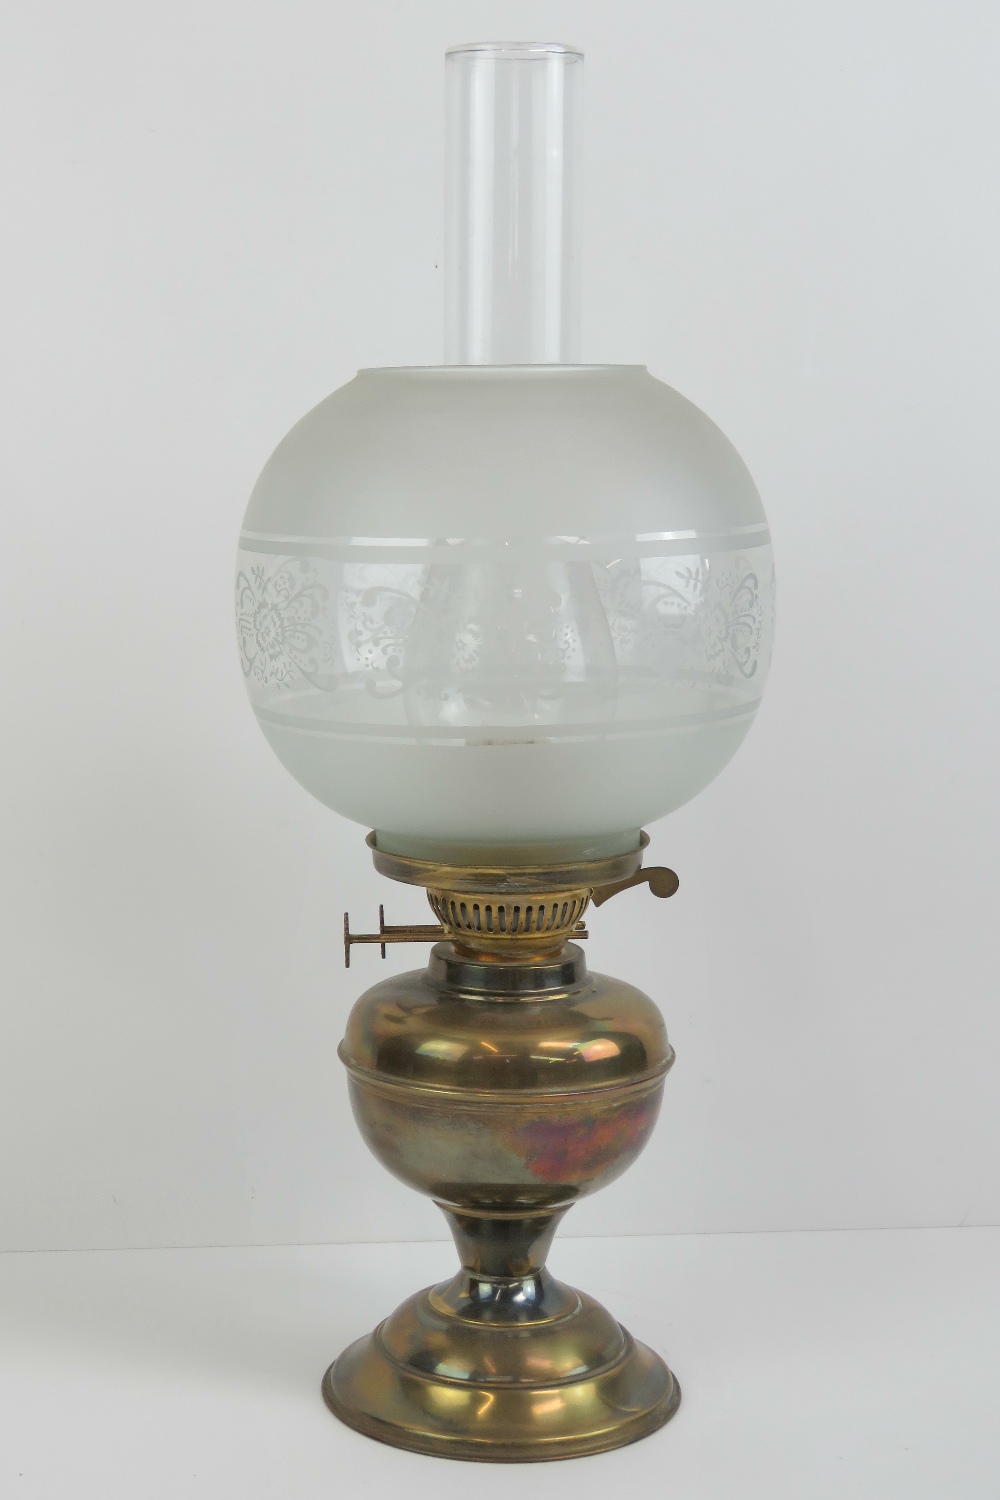 A brass oil lamp with glass chimney and